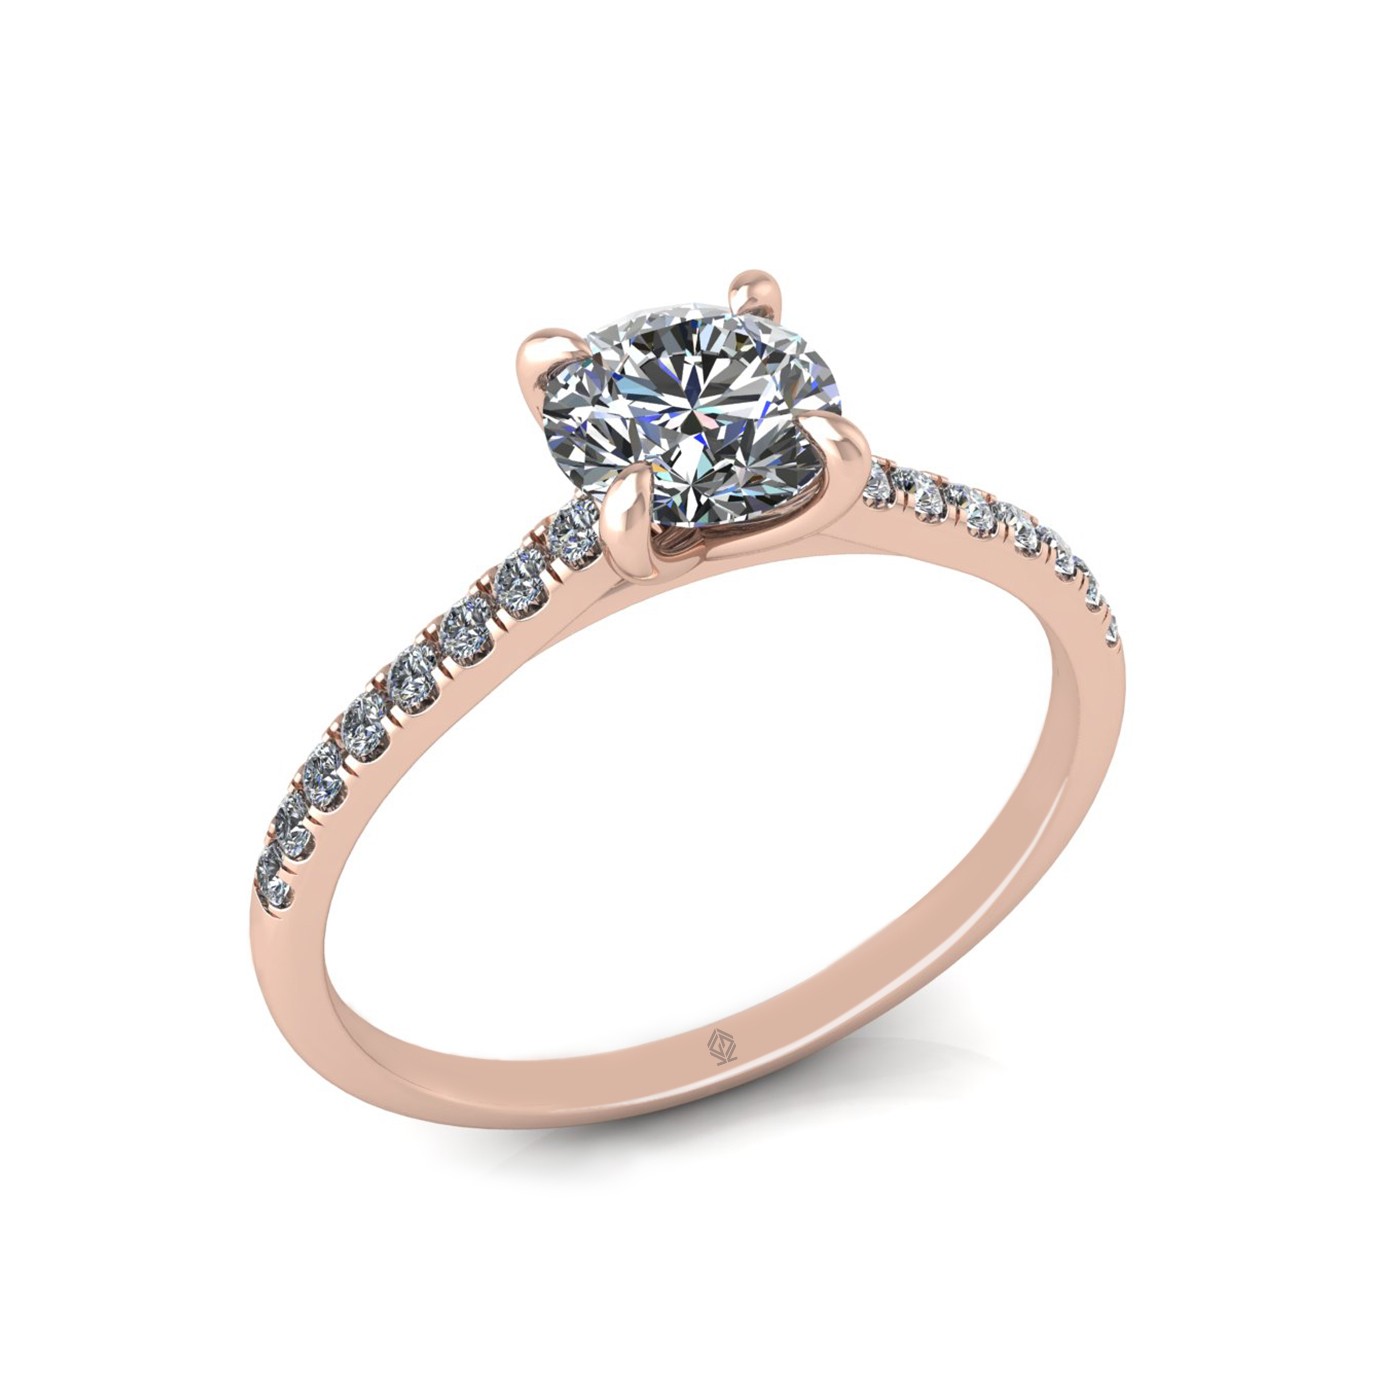 18k rose gold 1.0ct 4 prongs round cut diamond engagement ring with whisper thin pavÉ set band